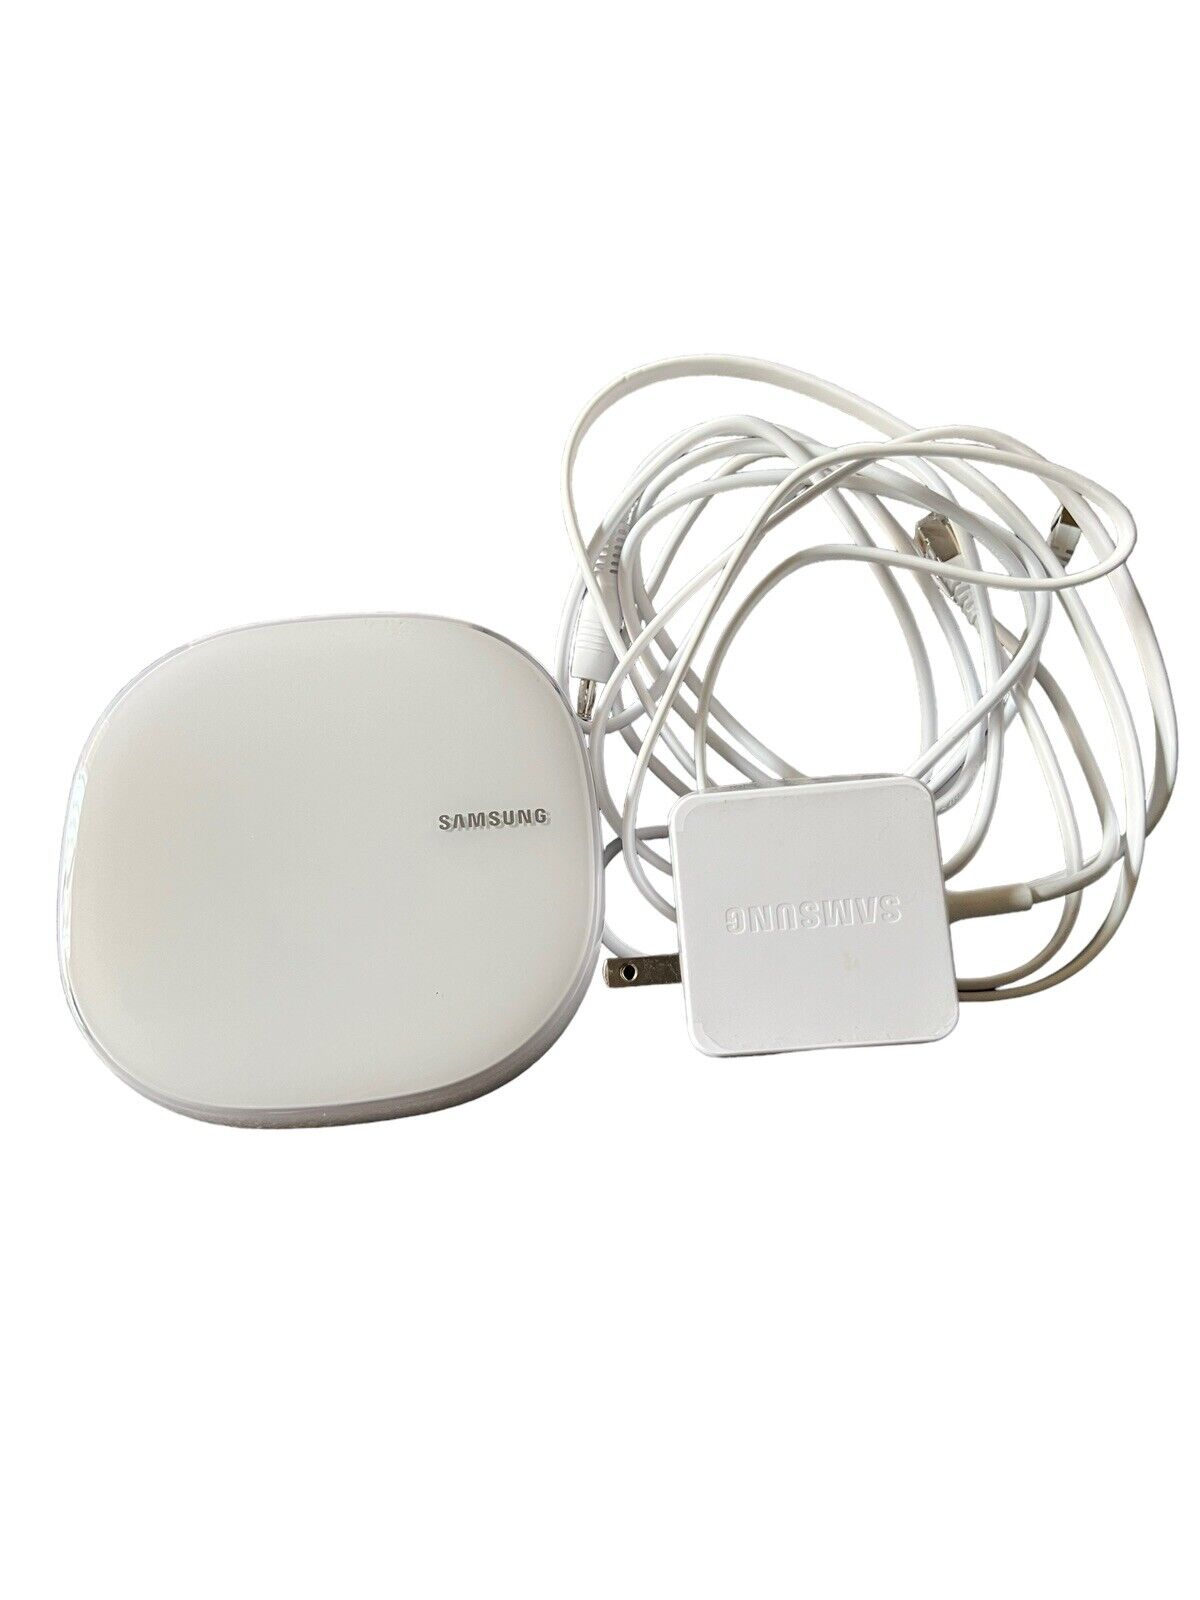 Samsung Connect Home Pro Smart WiFi System 4X4 MIMO (ET-WV530)